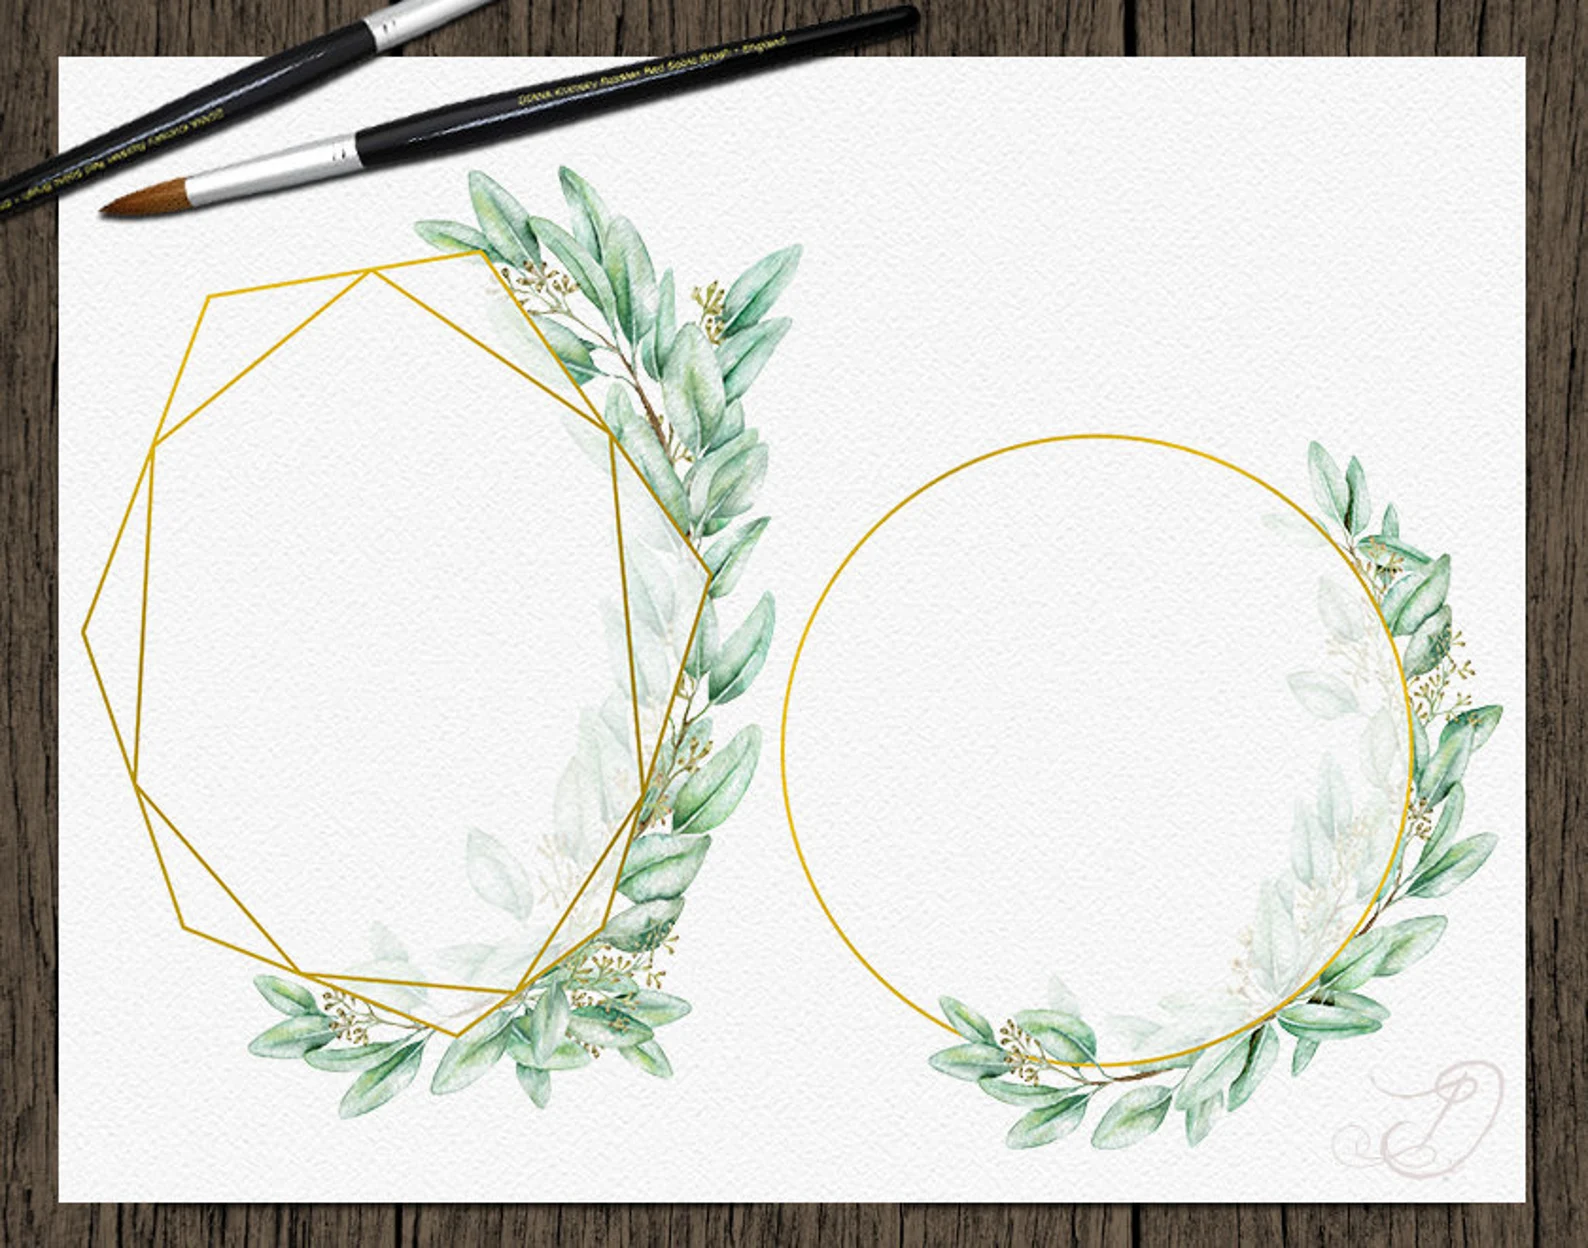 Minimalistic frames with gold border.